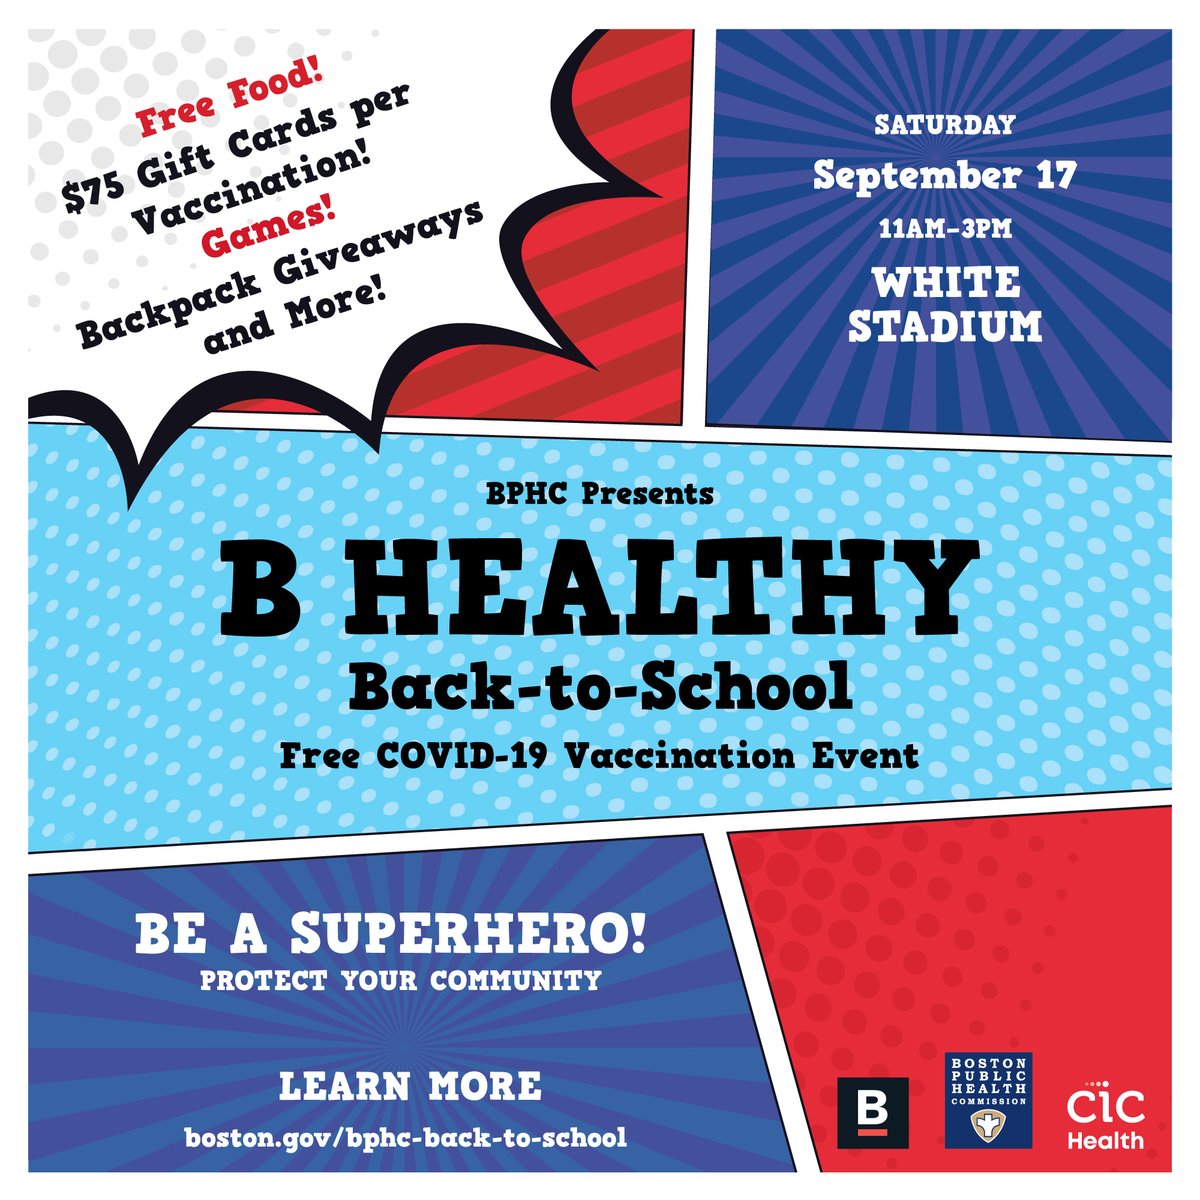 If you like free food, games, and giveaways, then do we have event for you this weekend! Come down to White Stadium in Franklin Park this Saturday for the B Healthy Back-to-School COVID-19 vaccination clinic. Vaccines available for everyone ages 6-months and older.